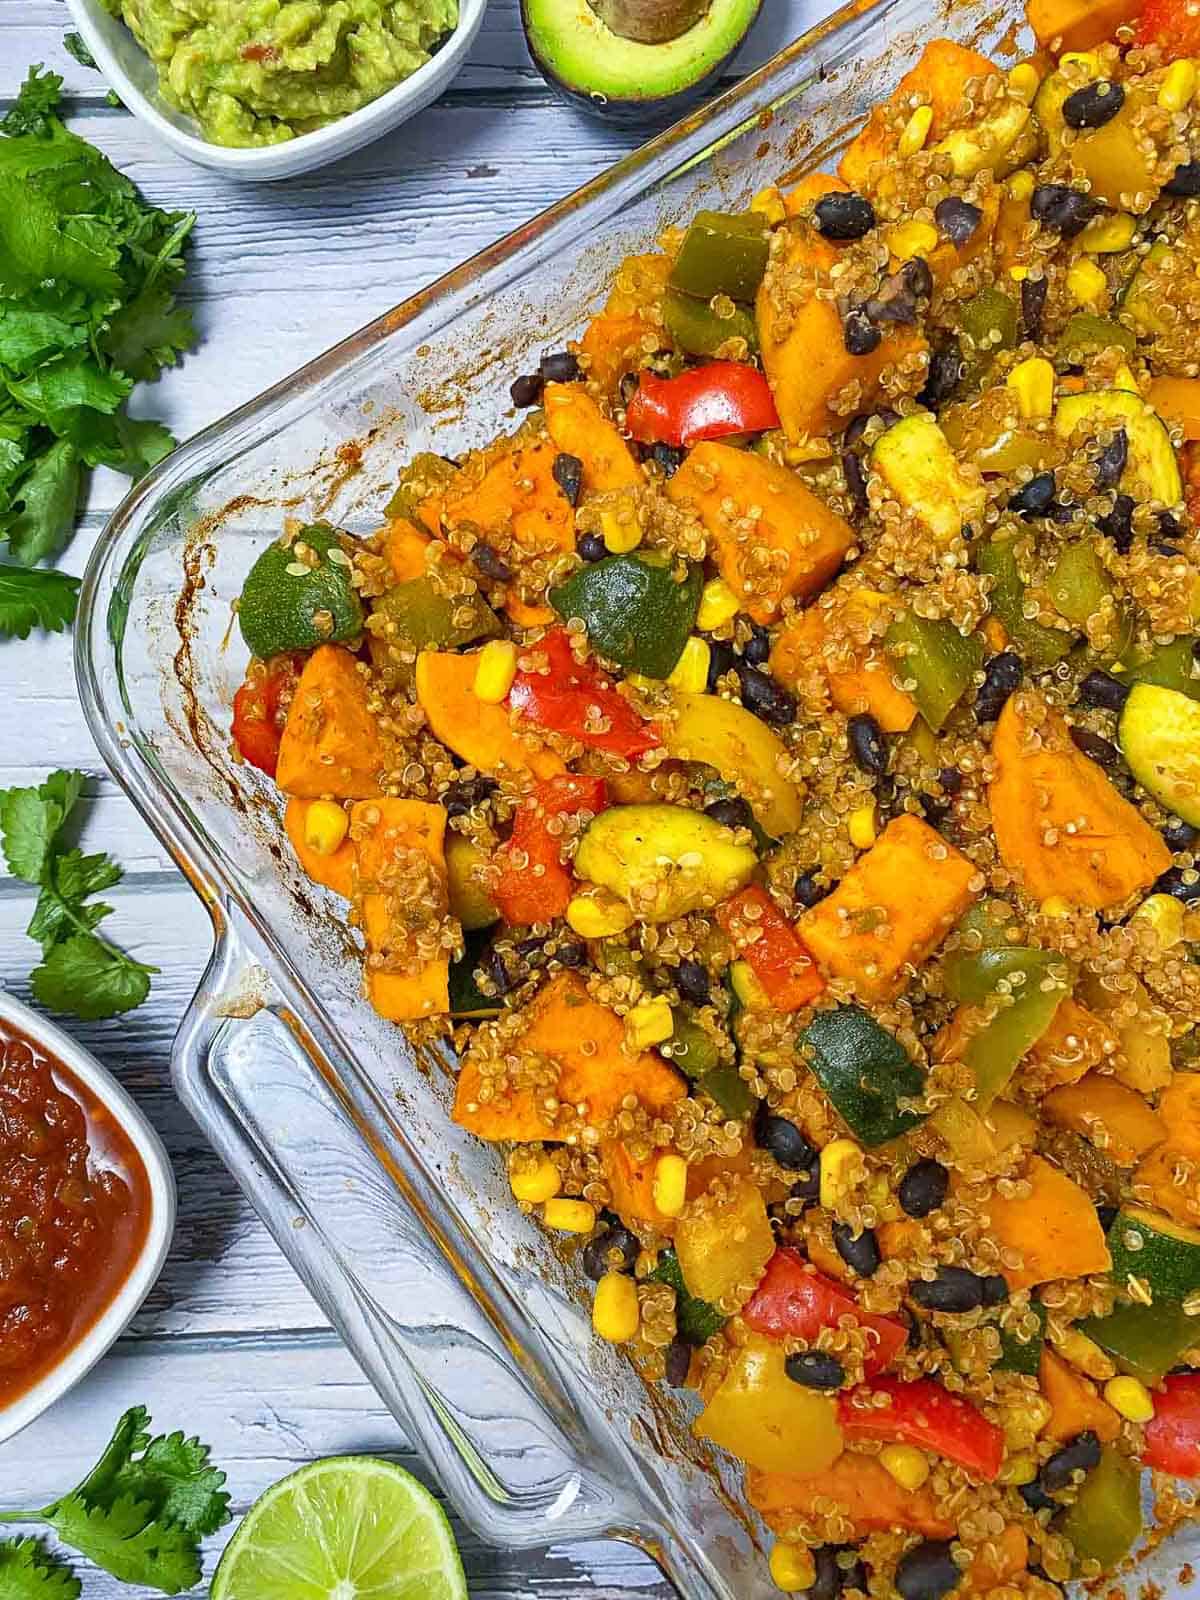 Casserole dish with sweet potato, zucchini, peppers, black beans and quinoa inside,